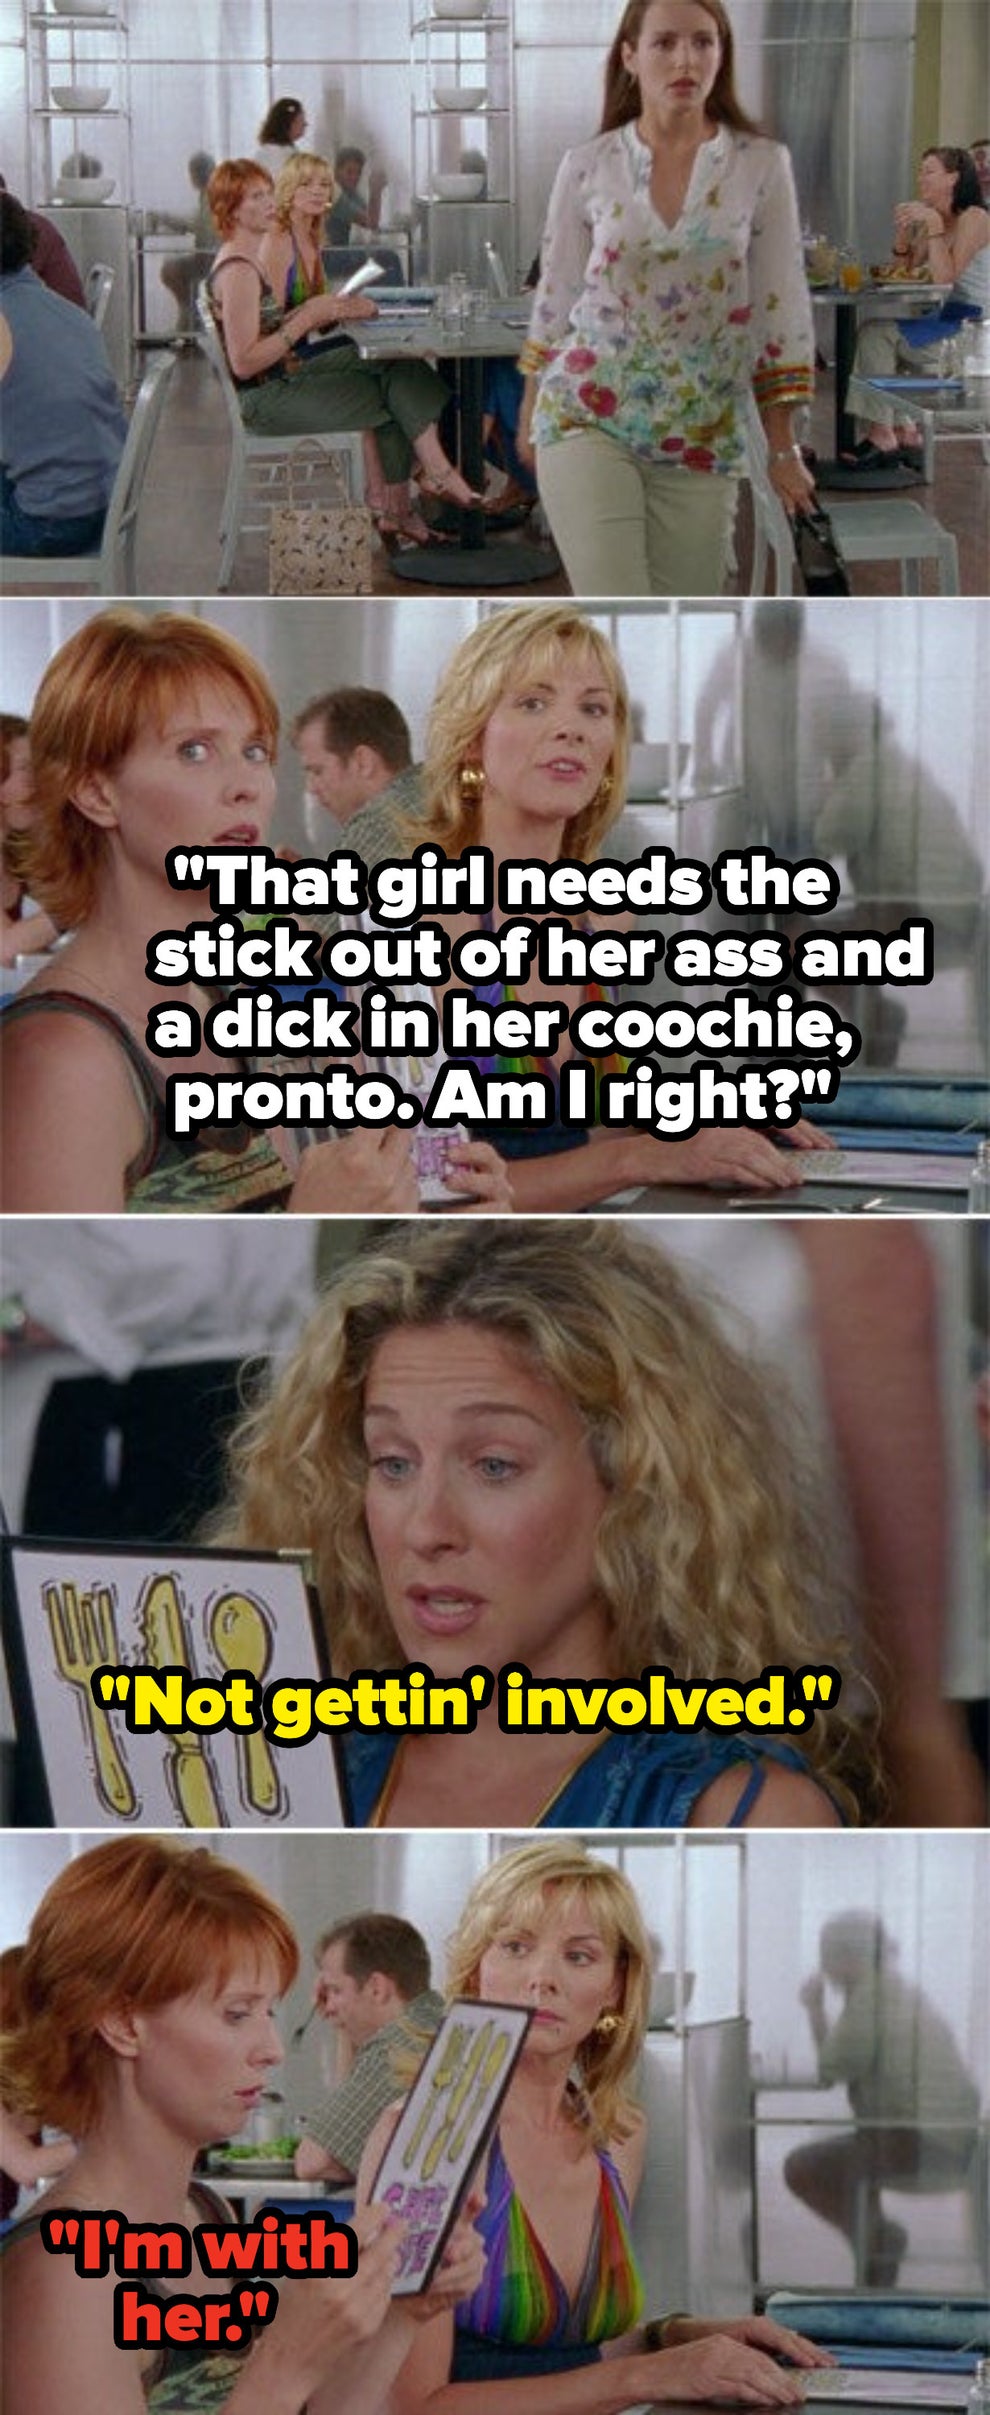 23 Bestworst “sex And The City” Moments With Samantha And Her Friends